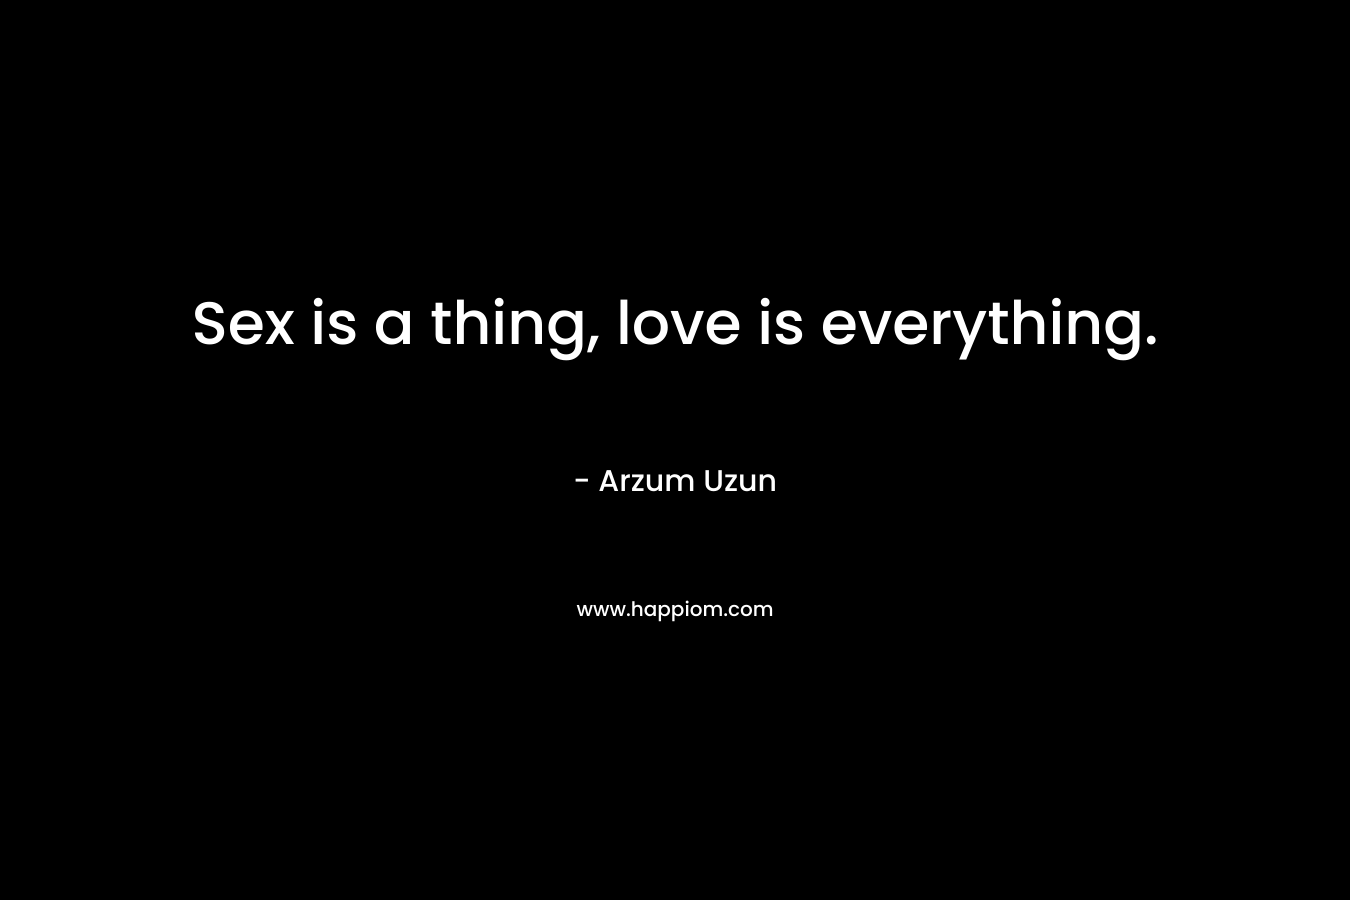 Sex is a thing, love is everything.